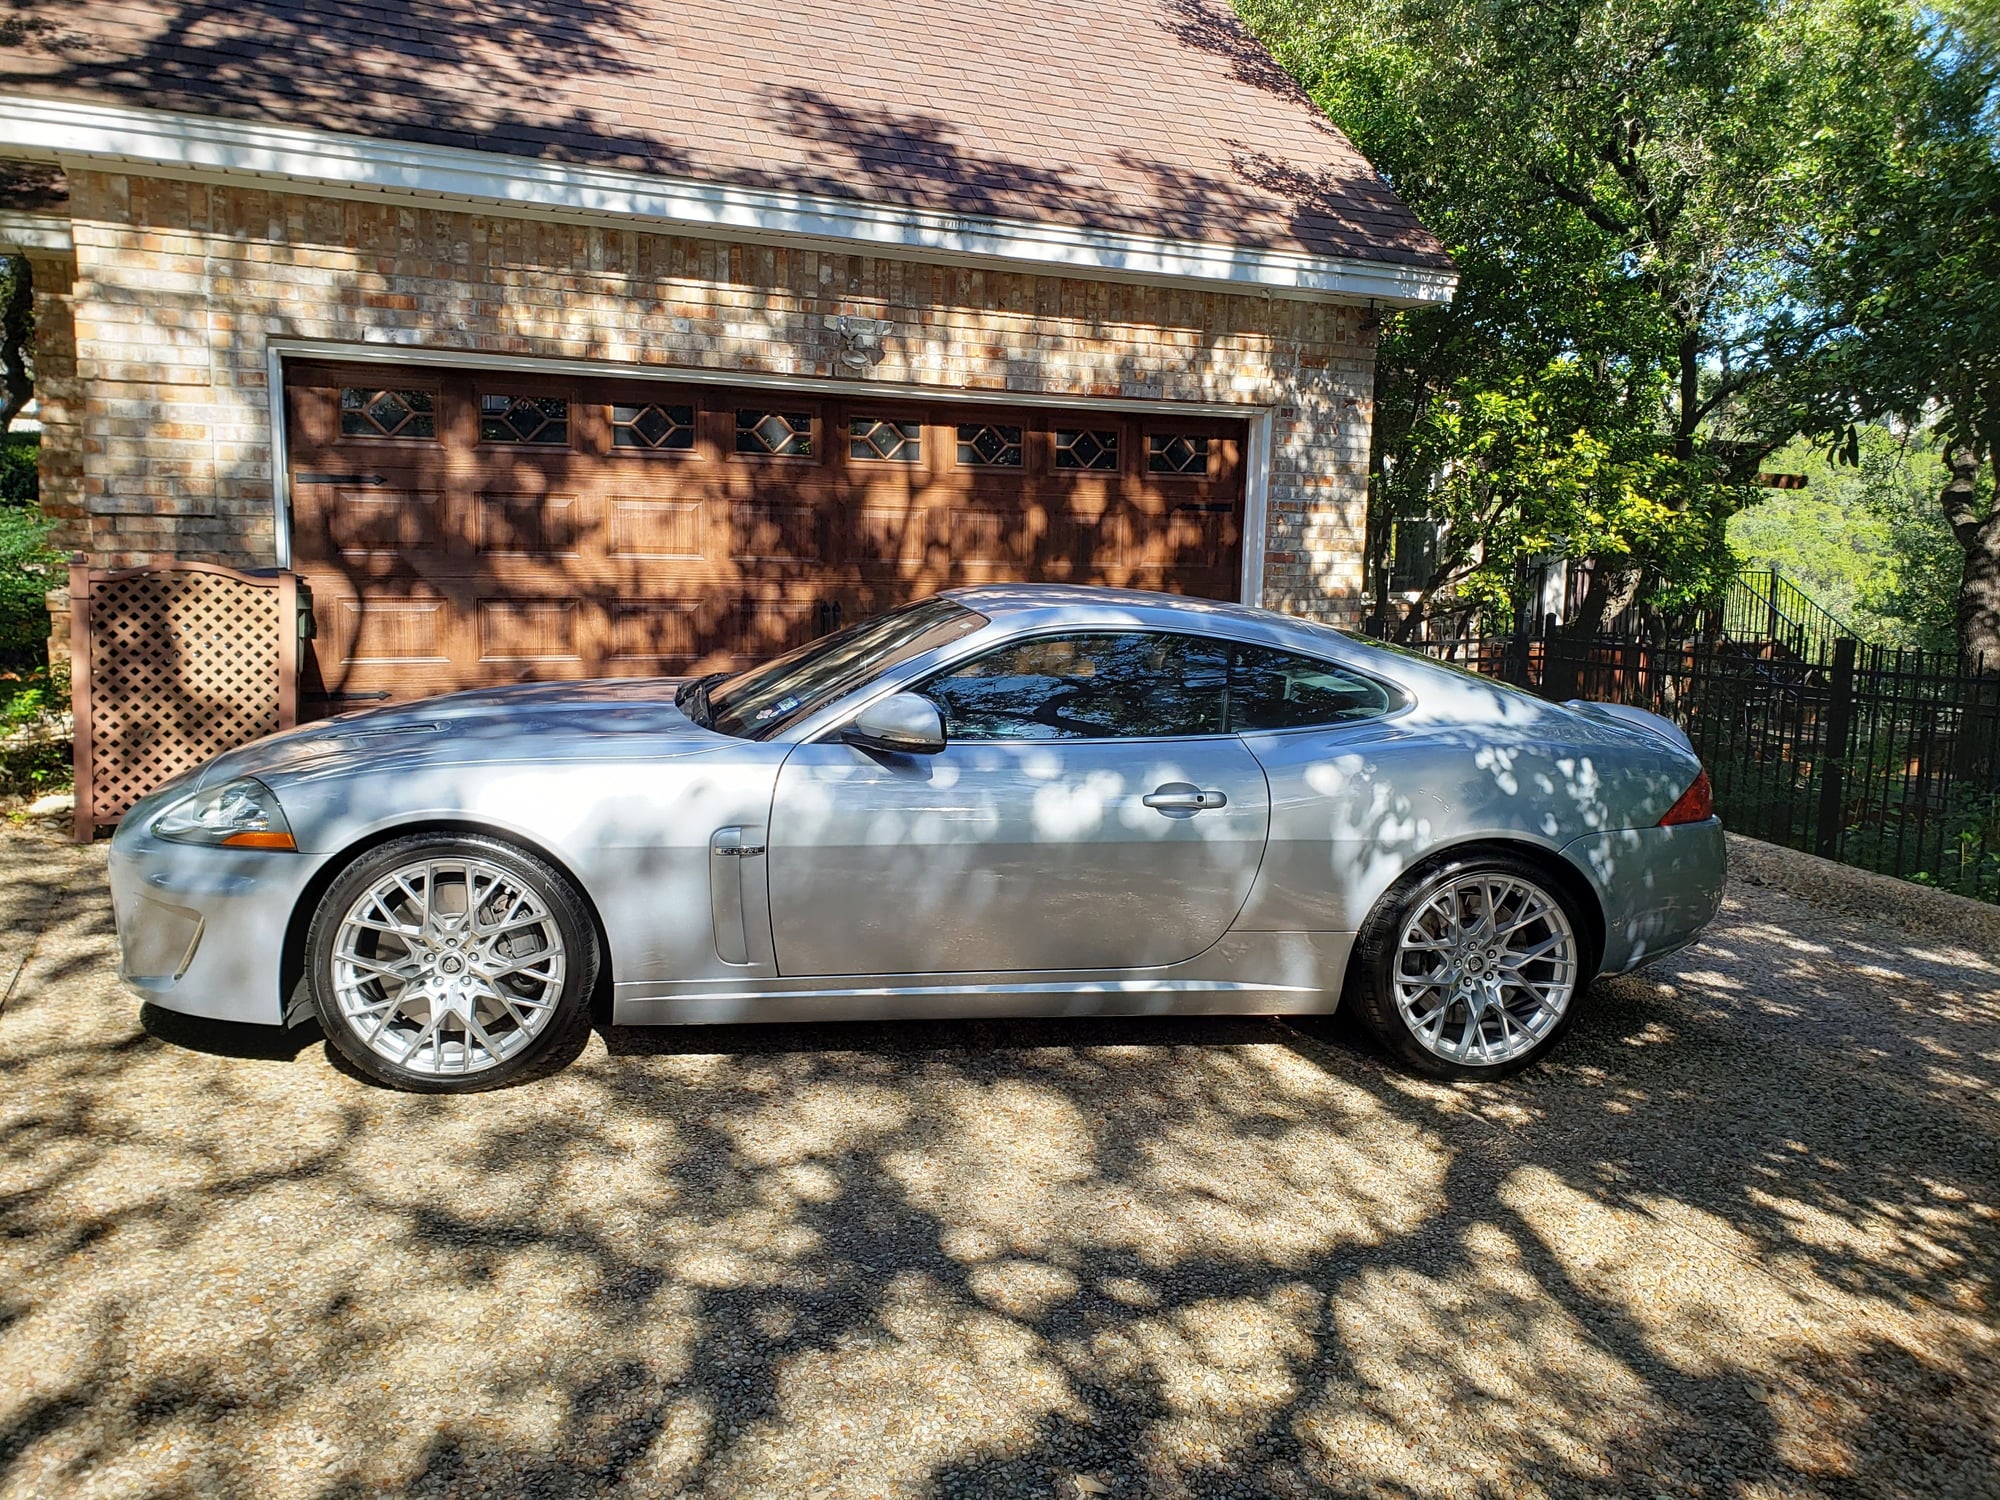 2010 Jaguar XKR - 2010 jaguar xk-r -- exceptional condition - Used - VIN SAJWA4DC4AMB37184 - 42,800 Miles - 8 cyl - 2WD - Automatic - Coupe - Silver - Austin, TX 78730, United States